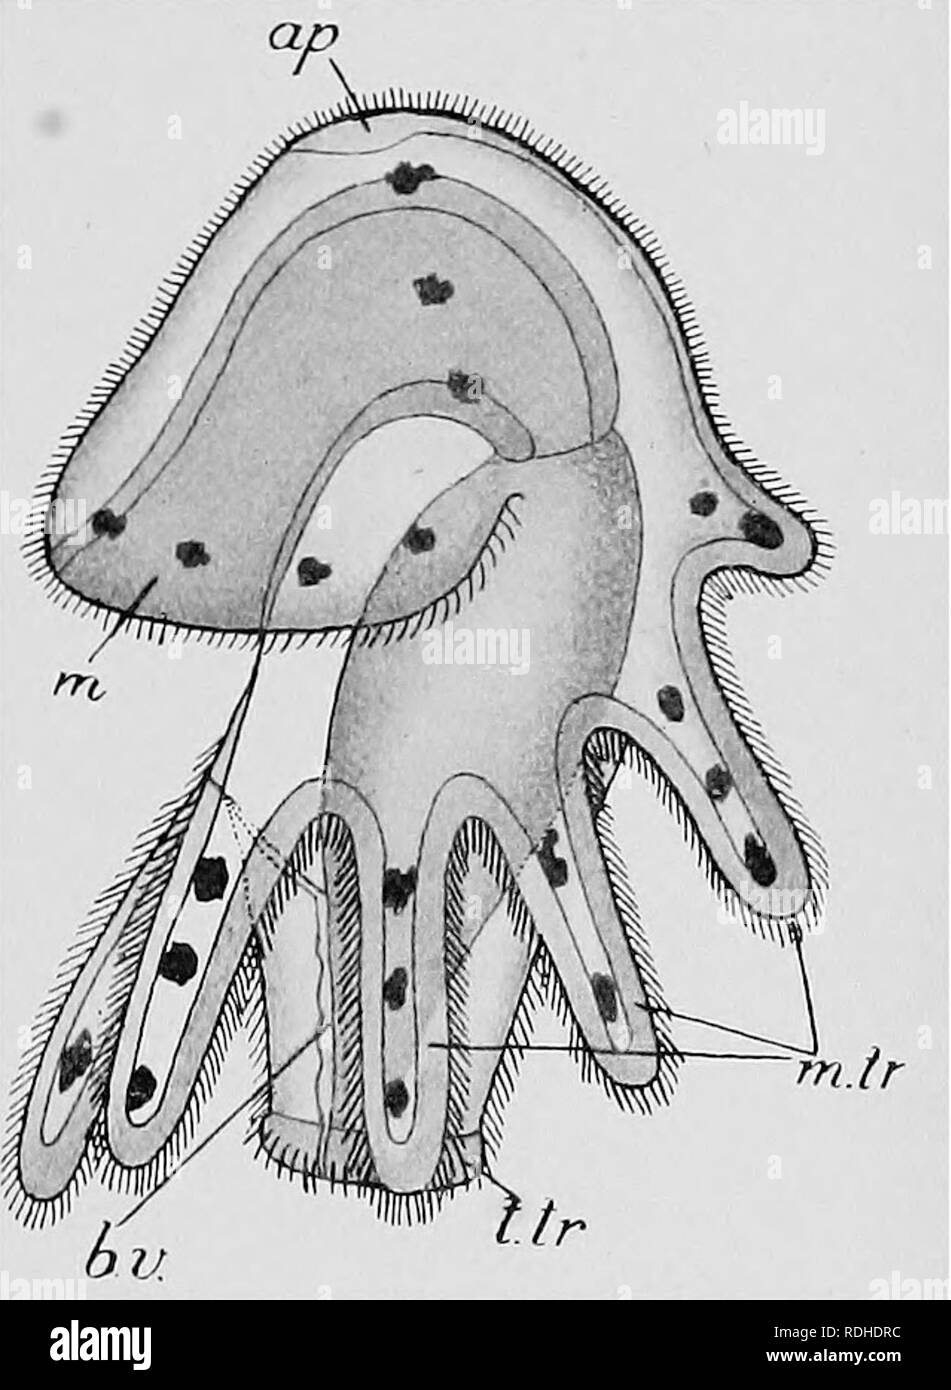 . Text-book of embryology. Embryology. PODAXONIA 381 The full embryonic history of Phoronis has not been satisfactorily made out, although a preliminary account of the subject has been given by Caldwell (1883 and 1885), and further work on the subject has been done by Masterman (1898), Ikeda (1901), de Selys Long- champs (1902), and Shearer (1906). The free-swimming larva of Phoronis is termed Actinotrocha, and was regarded as an independent organism before its life-history was known. Its remarkable metamorphosis into the adult form was described by Metschnikoff (1871), while a minute descript Stock Photo